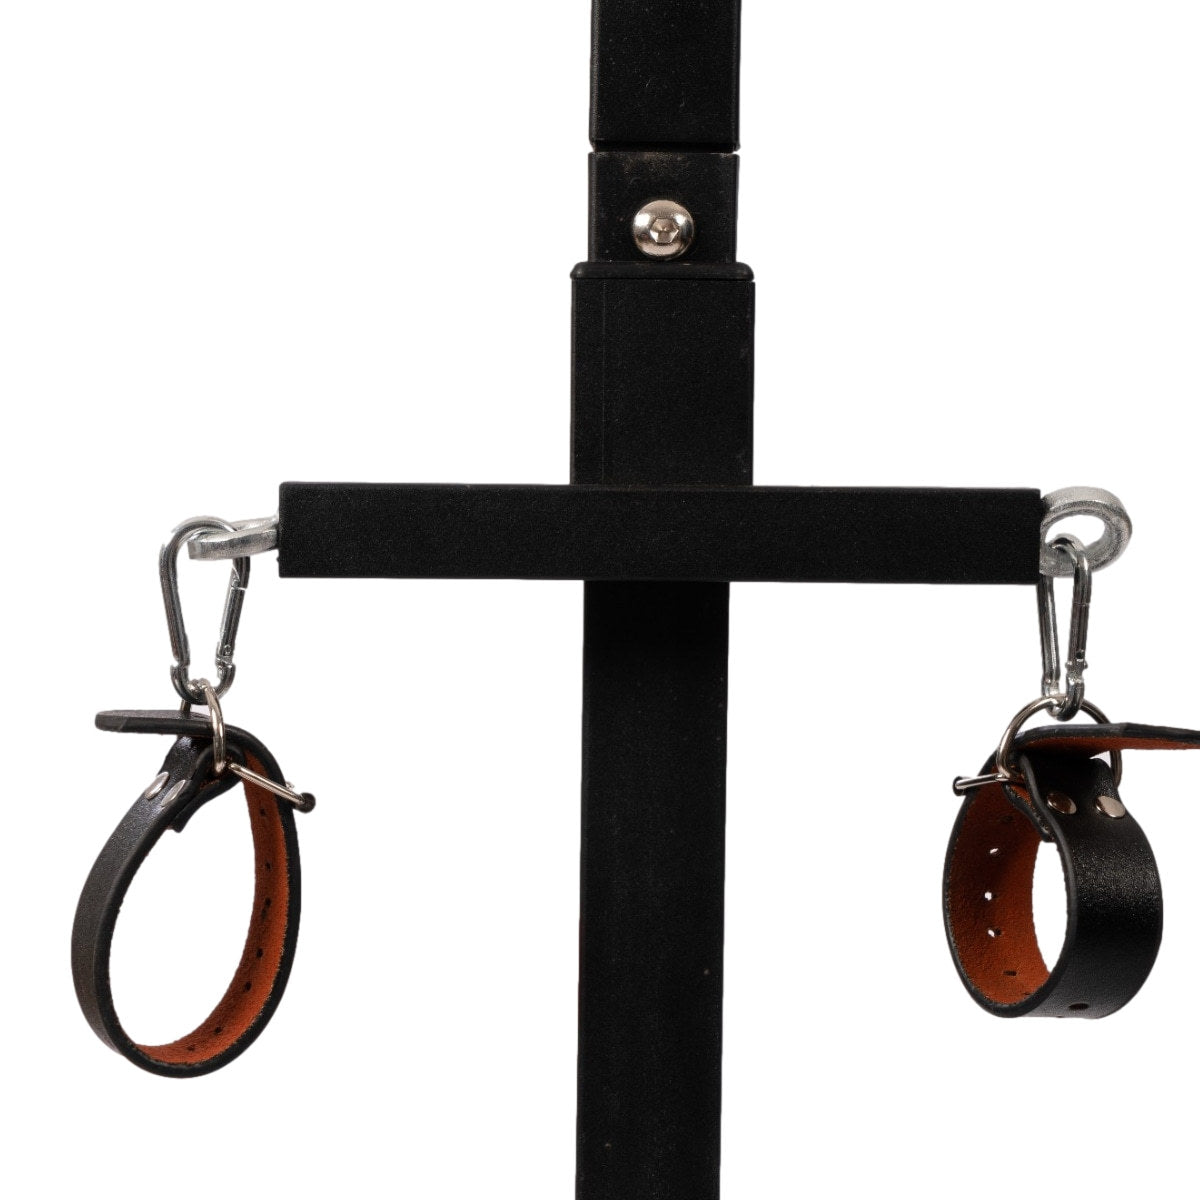 Roomsacred Black Series Forced Pleasure Pillory with Fully Adjustable Suction Cup Base with Separate Viberator Holder